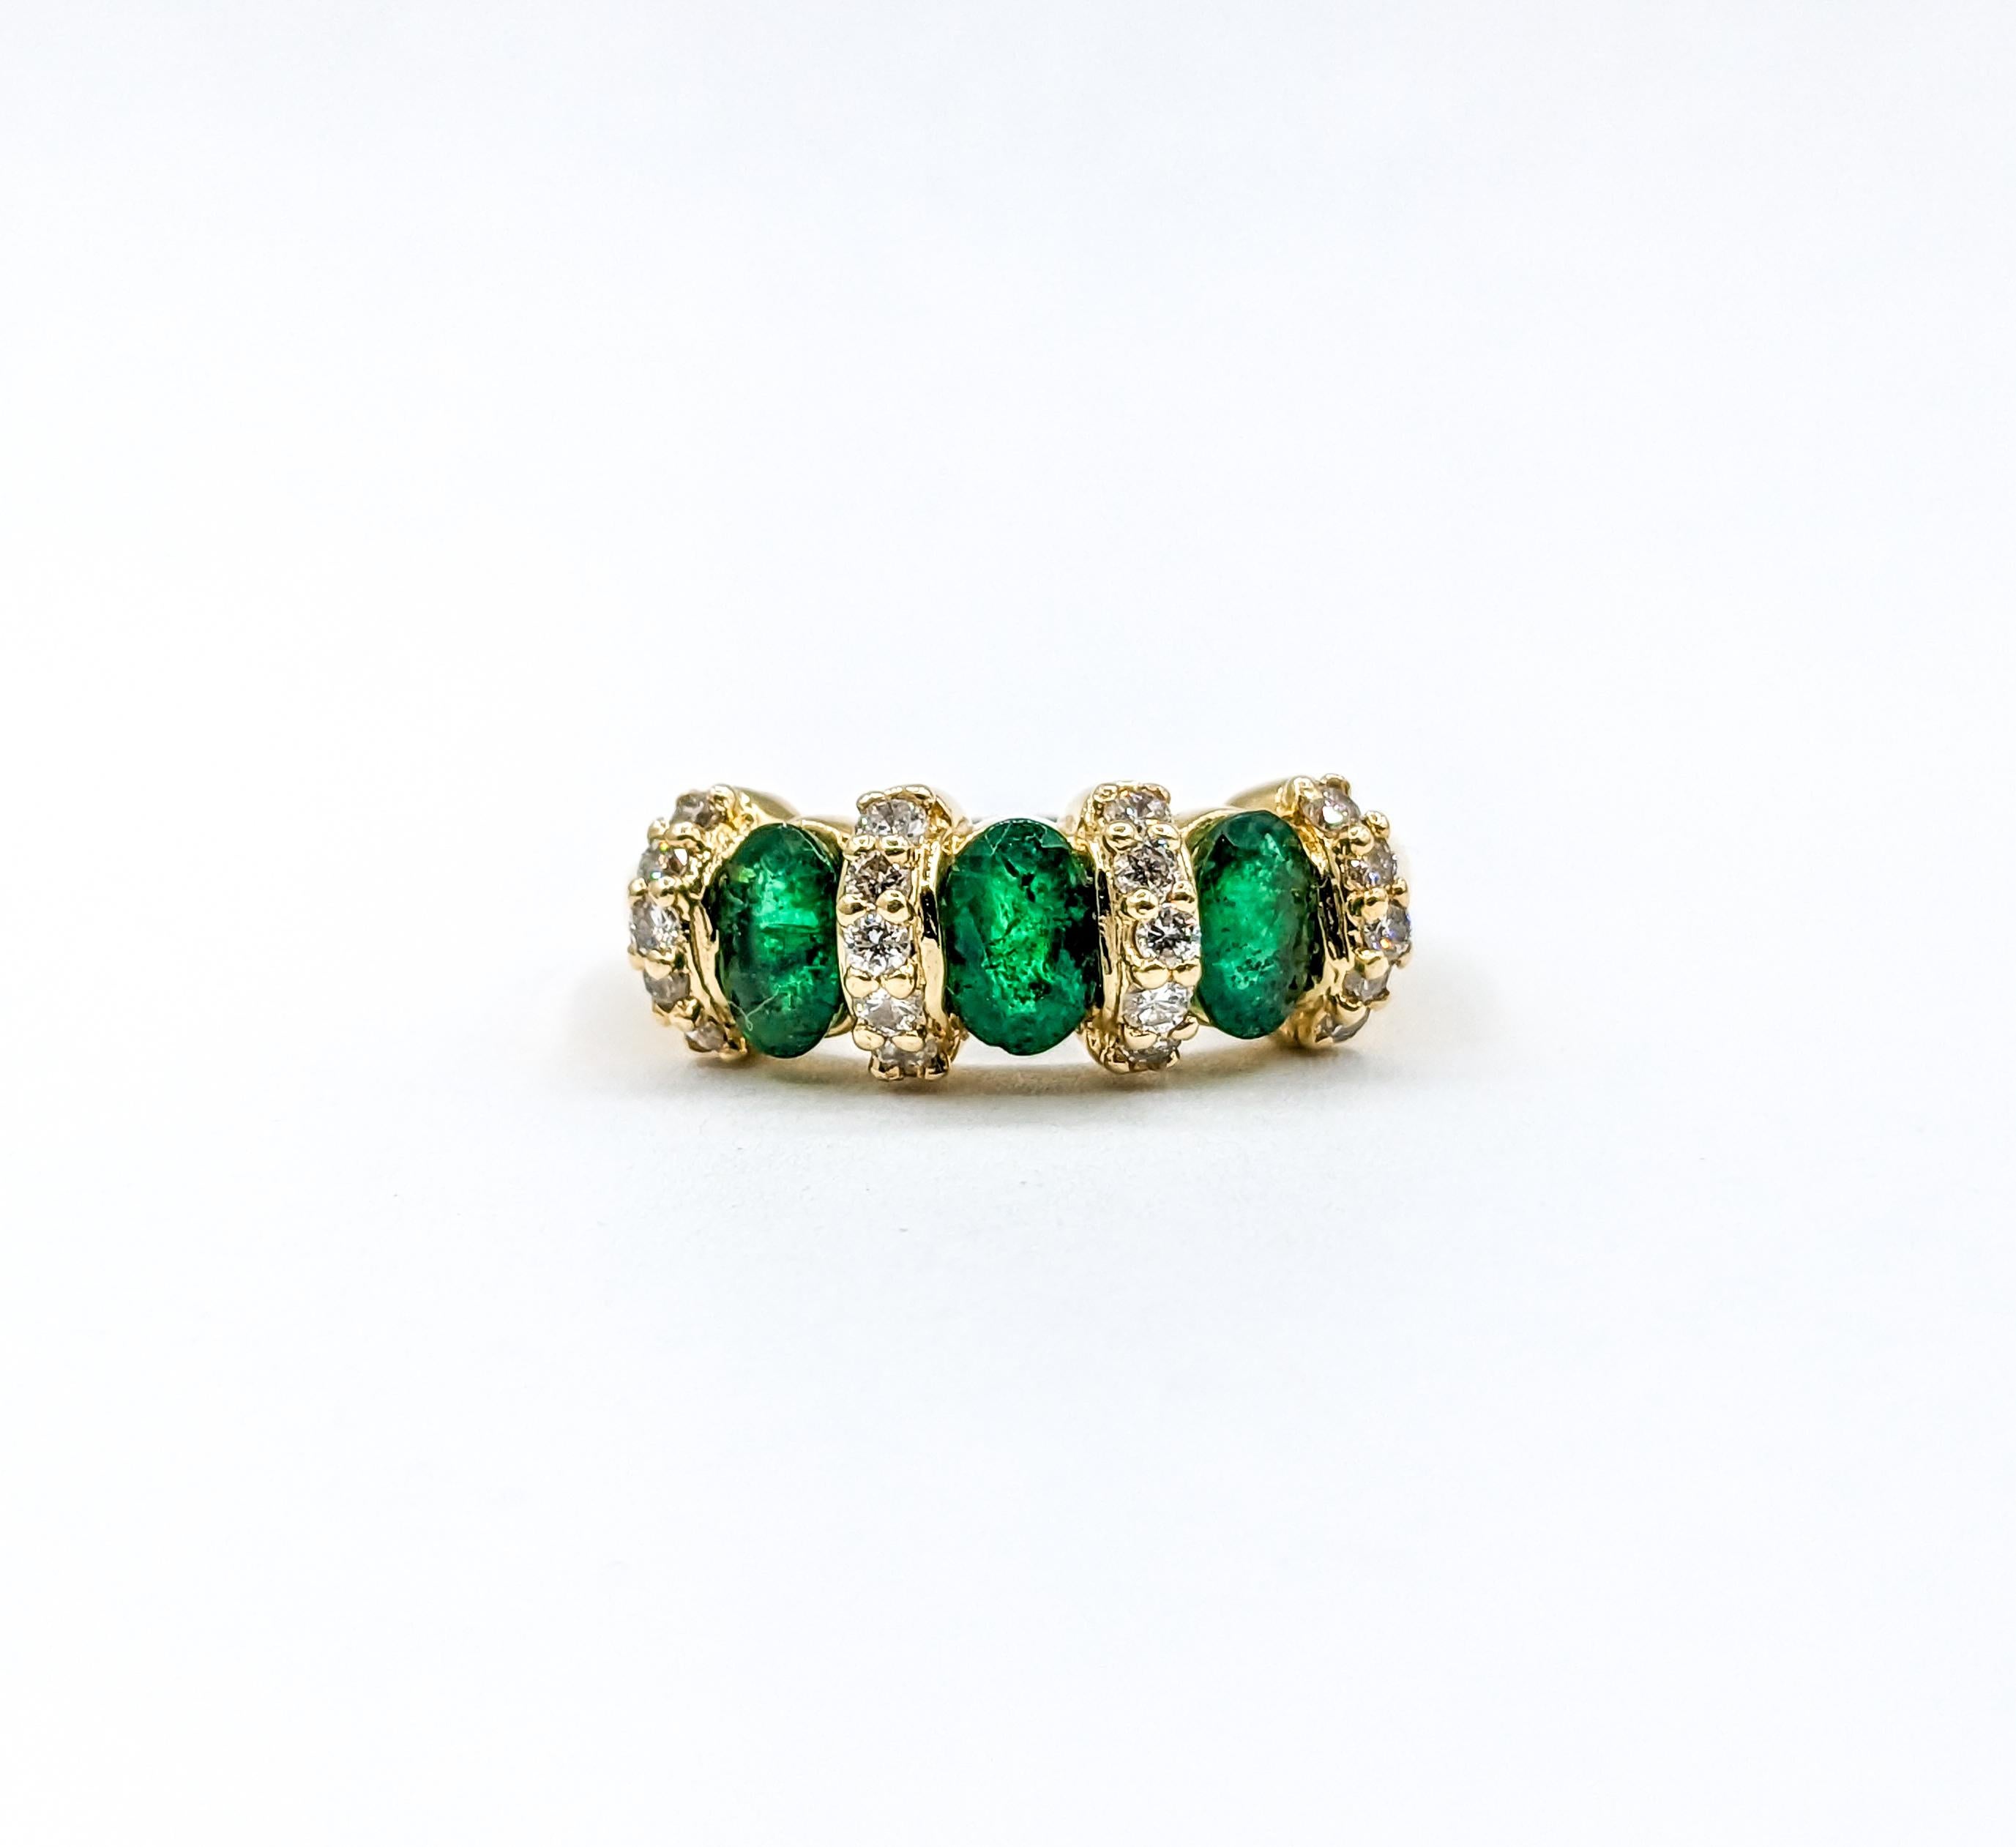 3-Stone Emerald & Diamond Ring in Yellow Gold

This stunning ring is crafted from 14k yellow gold and features a 1.20ctw oval cut emeralds as its centerpiece, surrounded by sparkling round diamonds with a total weight of 0.20ctw. The diamonds are of